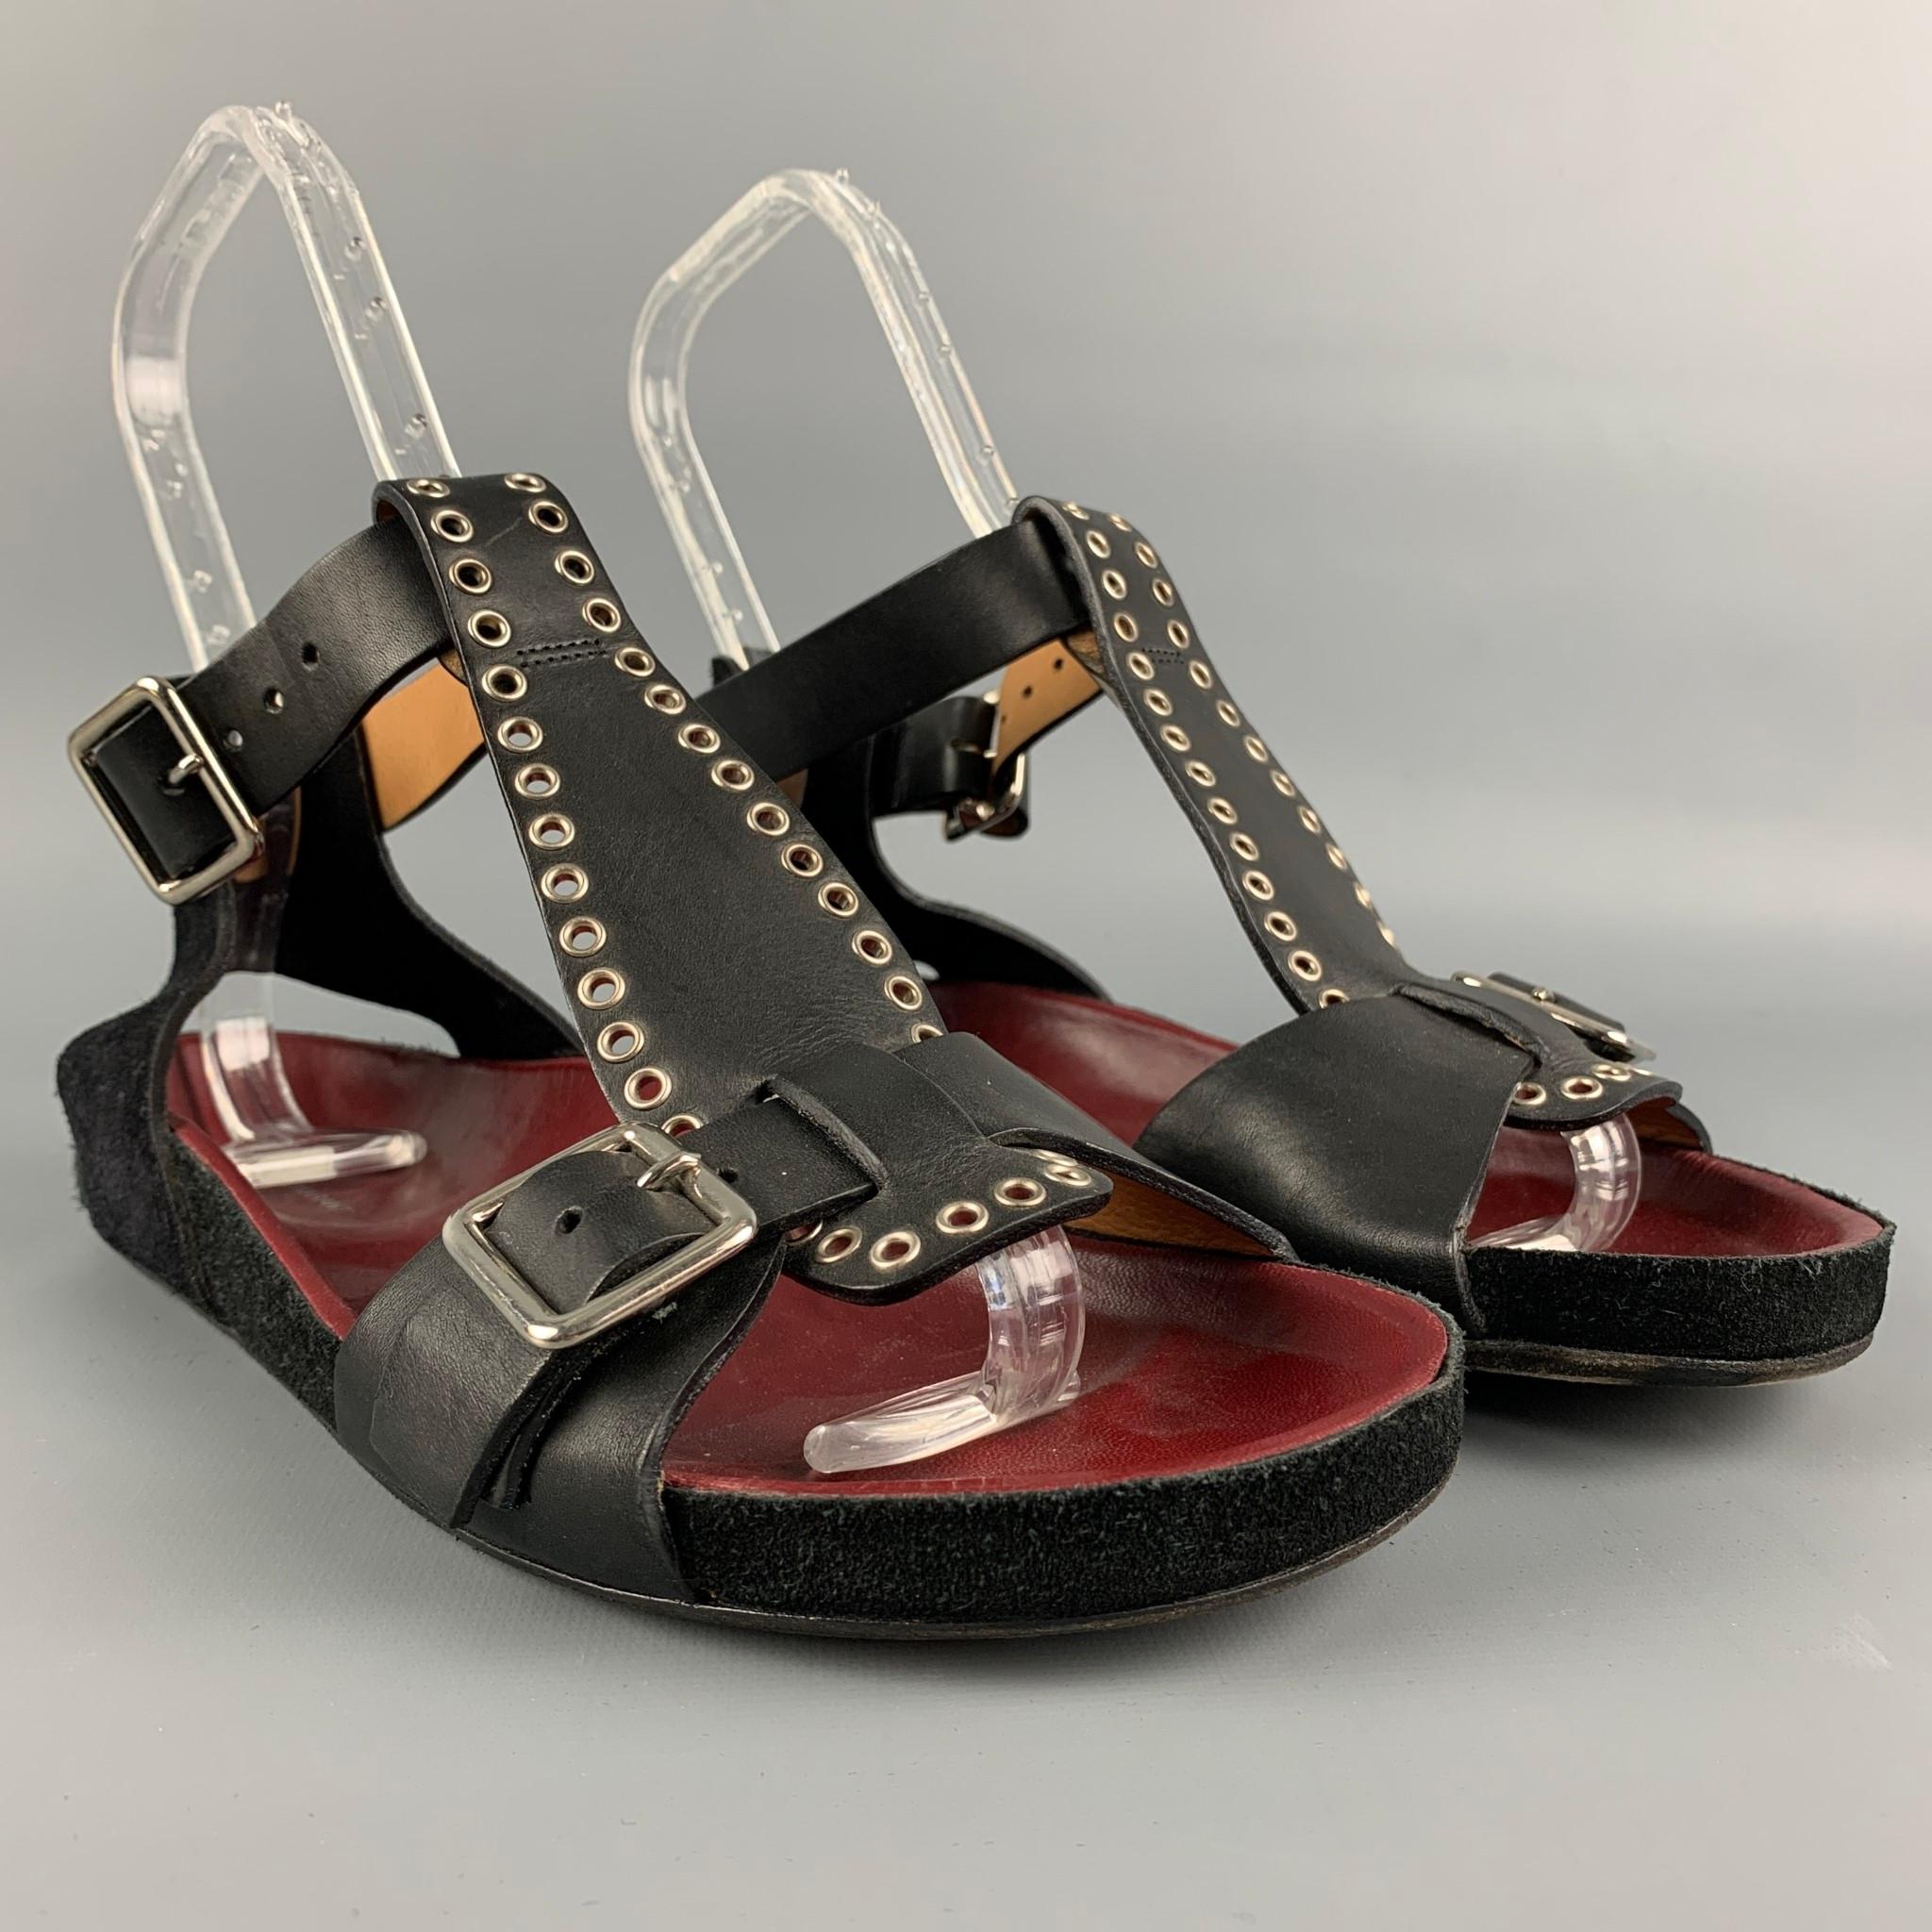 ISABEL MARANT flats comes in a black & silver featuring a t-strap, grommet details, and a strap buckle closure. Made in Italy.

Good Pre-Owned Condition.
Marked: 38

Outsole: 10 in. x 3.5 in. 